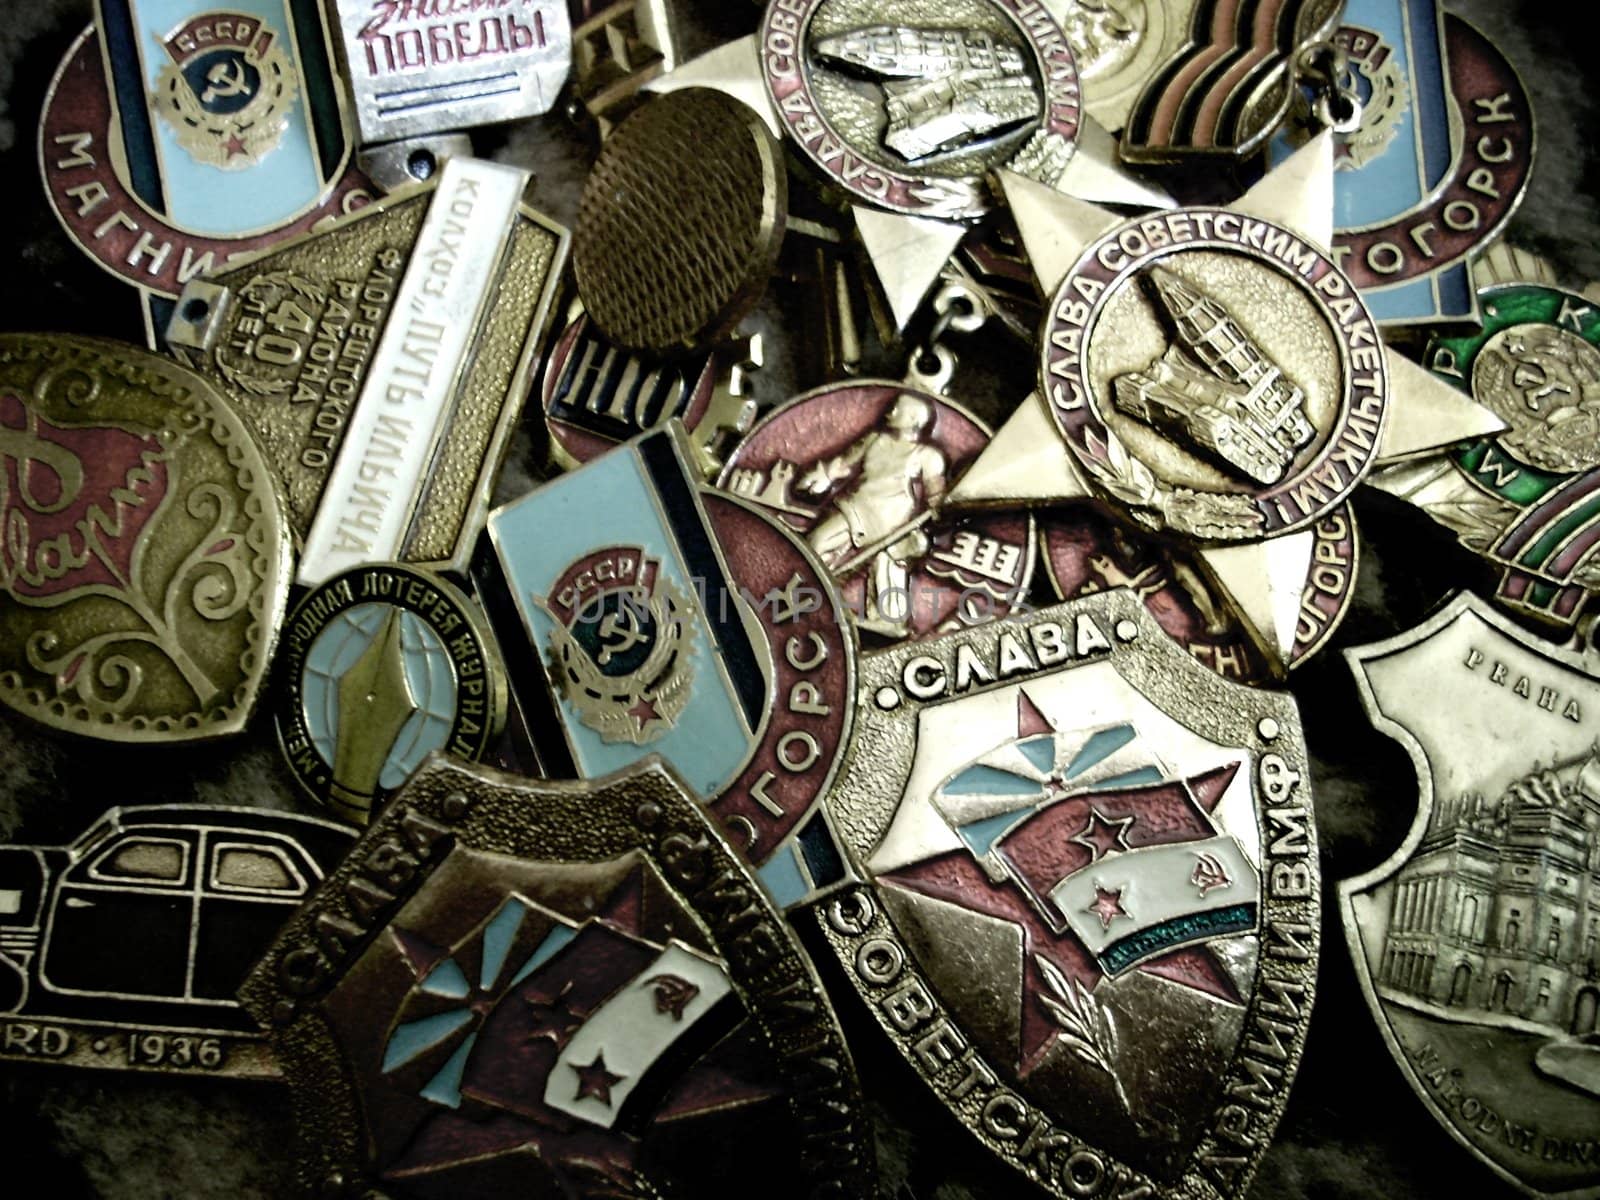 Texture of medals by DOODNICK